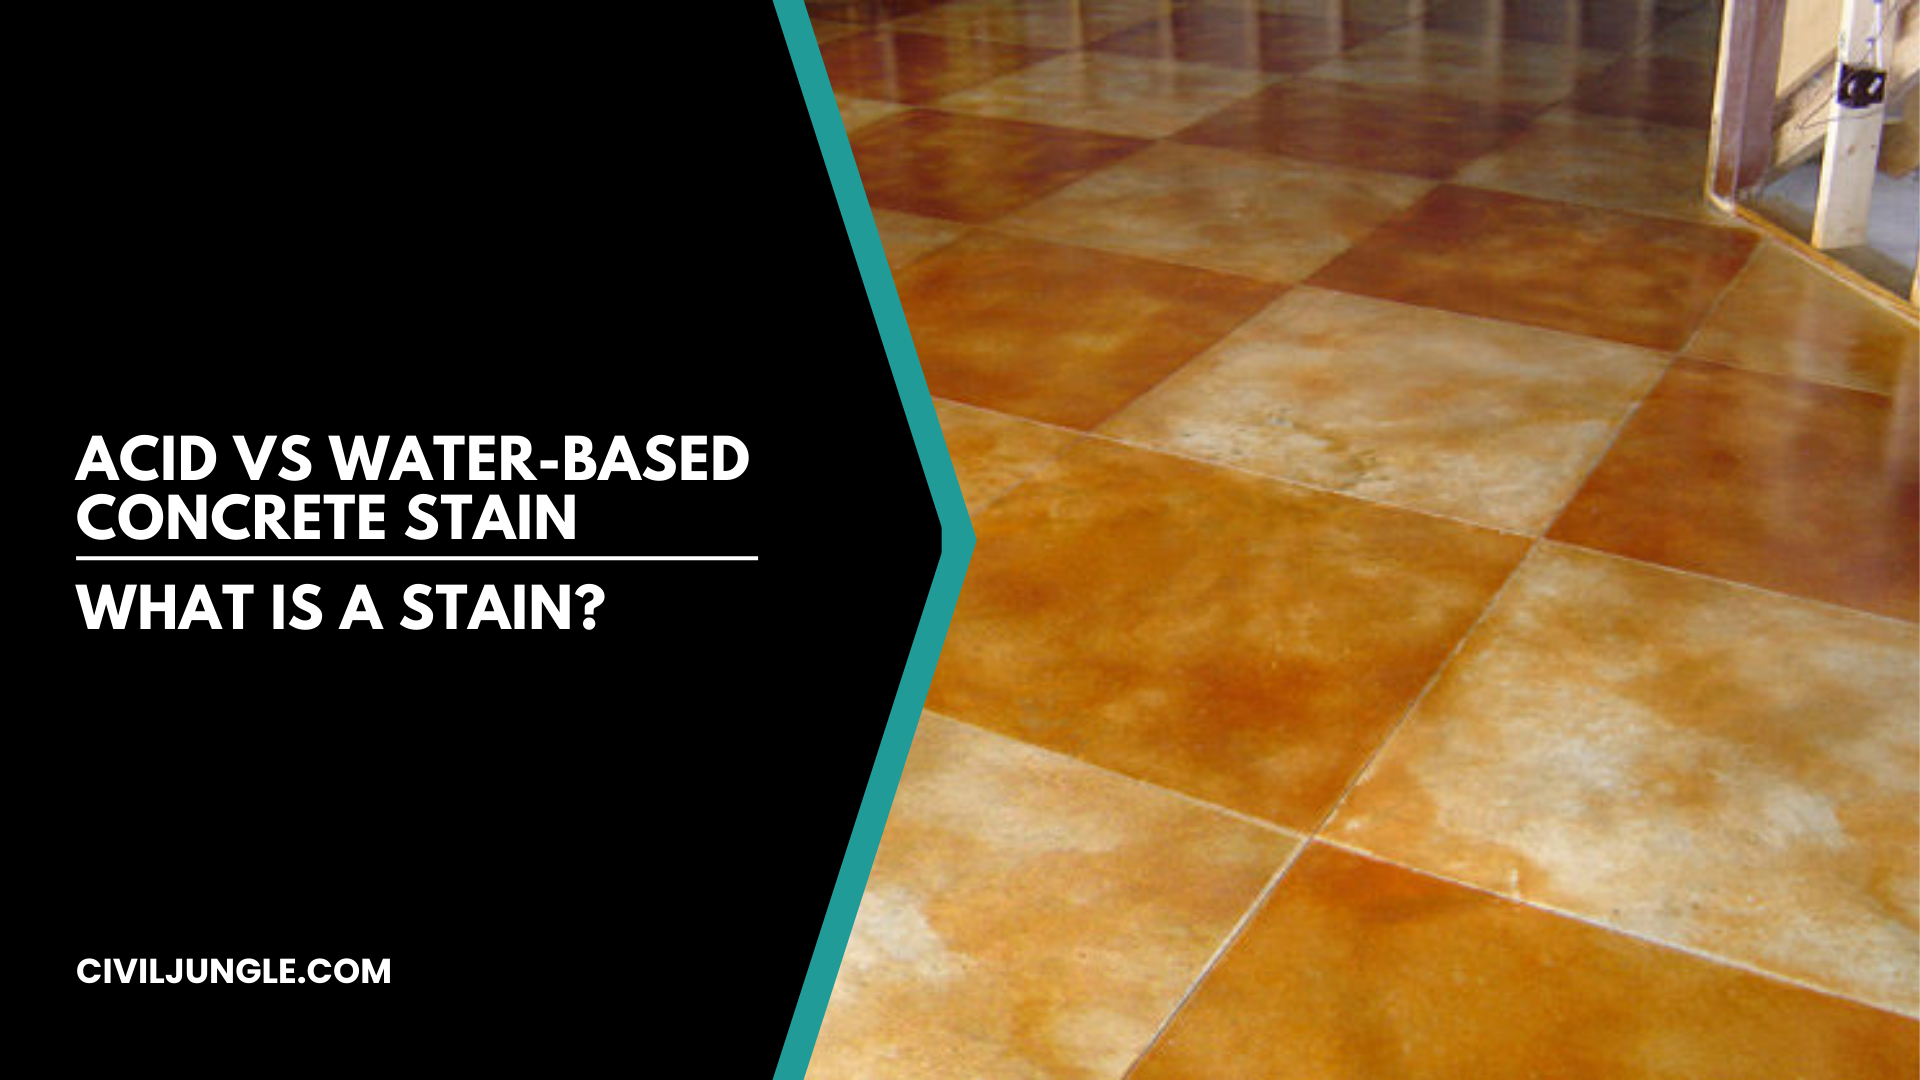 Acid Vs Water-Based Concrete Stain What Is a Stain